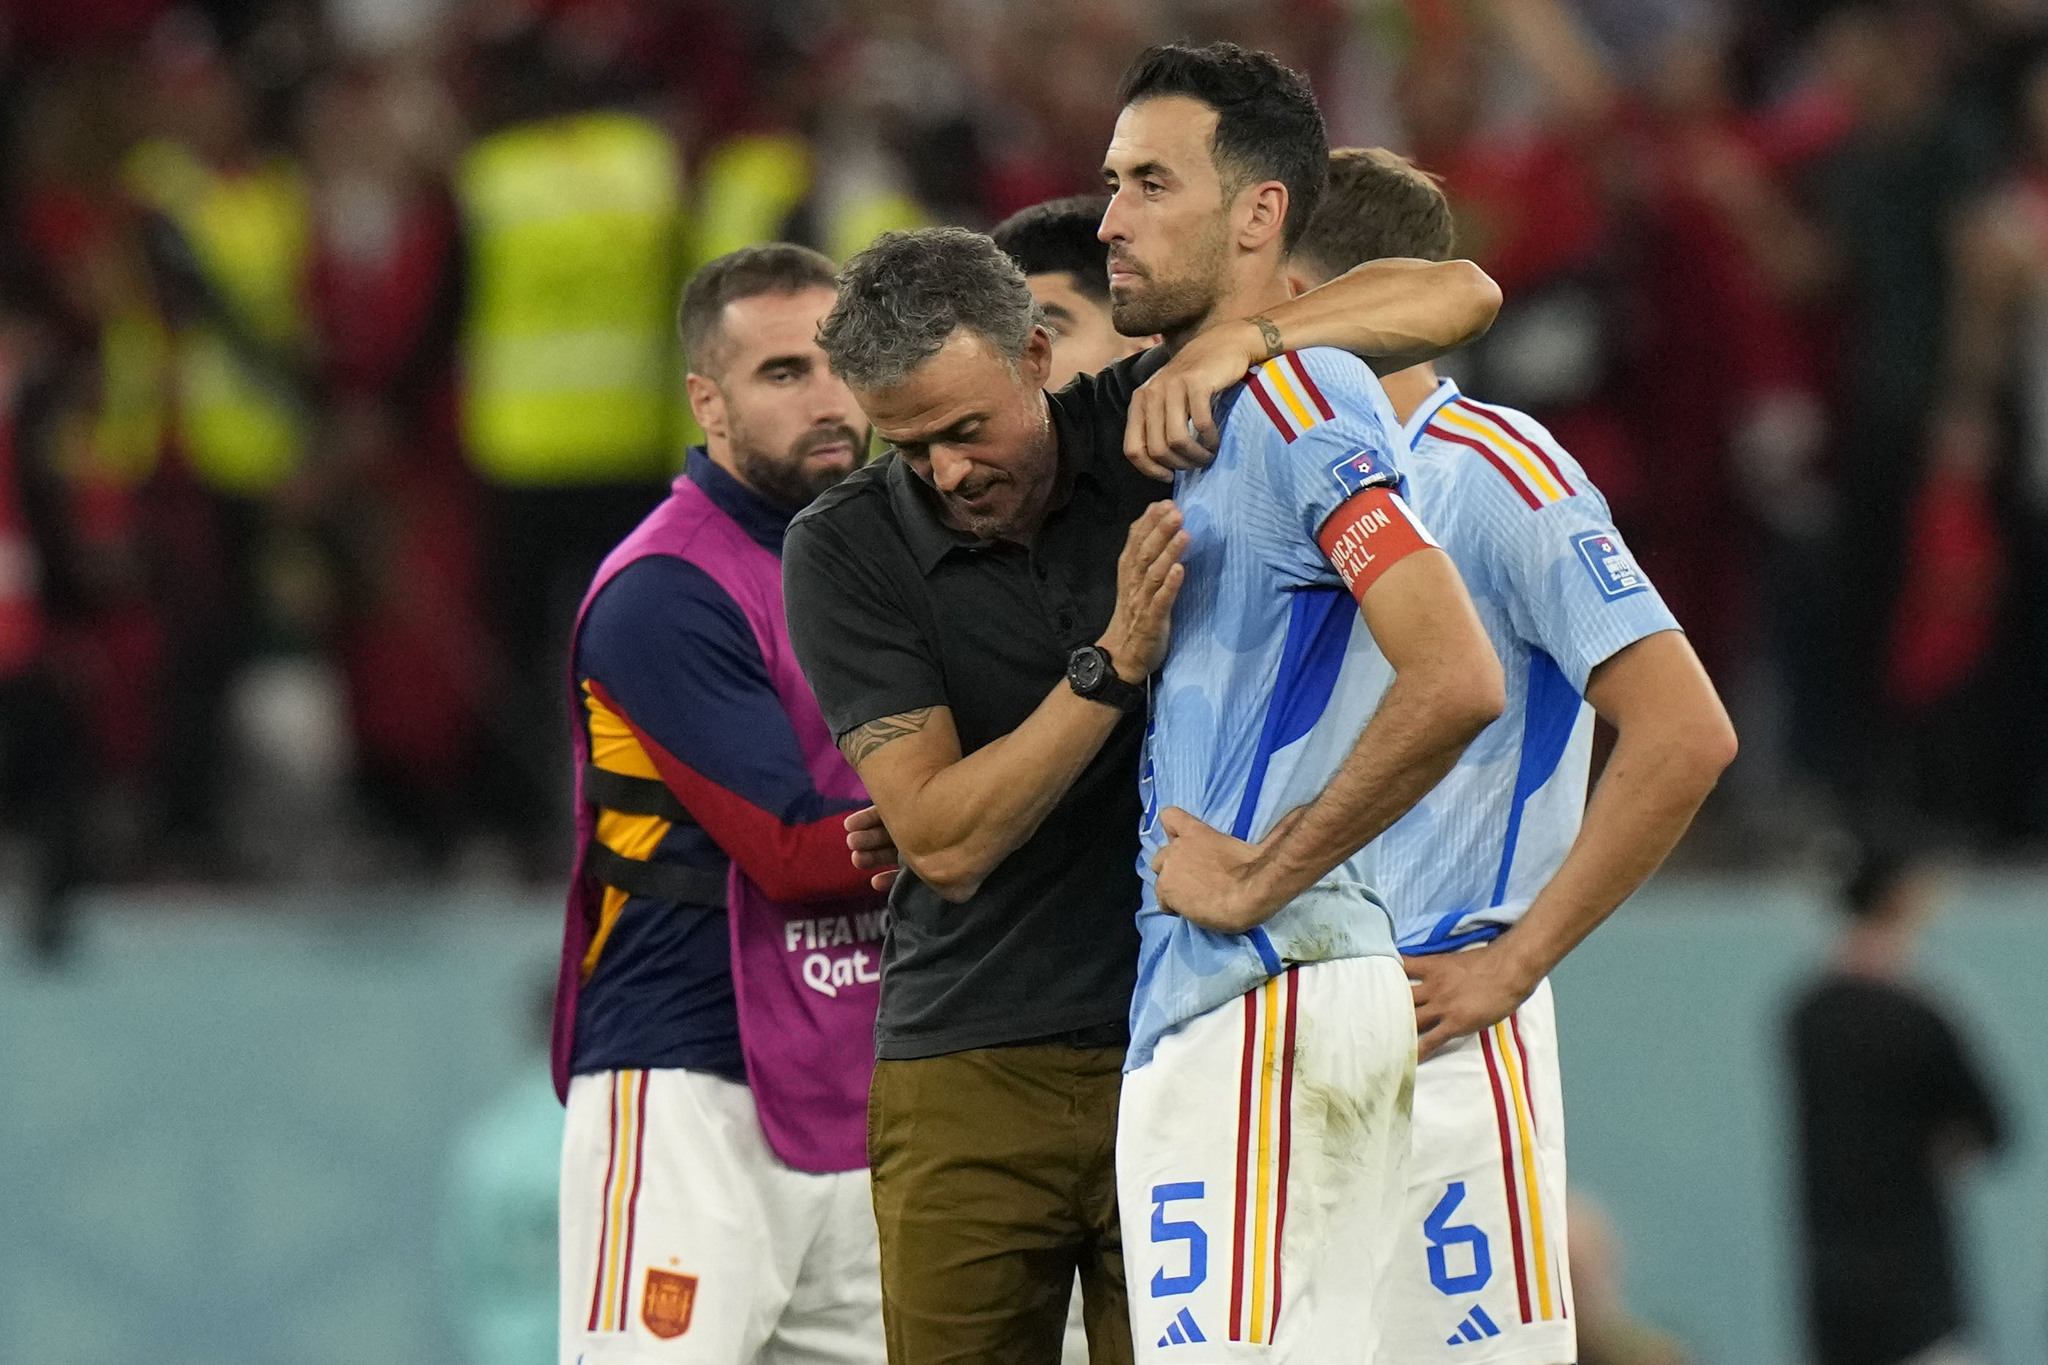 Spain's head coach lt;HIT gt;Luis lt;/HIT gt; lt;HIT gt;Enrique lt;/HIT gt;, left, embraces Sergio Busquets after the penalty shootout at the World Cup round of 16 soccer match between Morocco and Spain, at the Education City Stadium in Al Rayyan, Qatar, Tuesday, Dec. 6, 2022. (AP Photo/Luca Bruno)